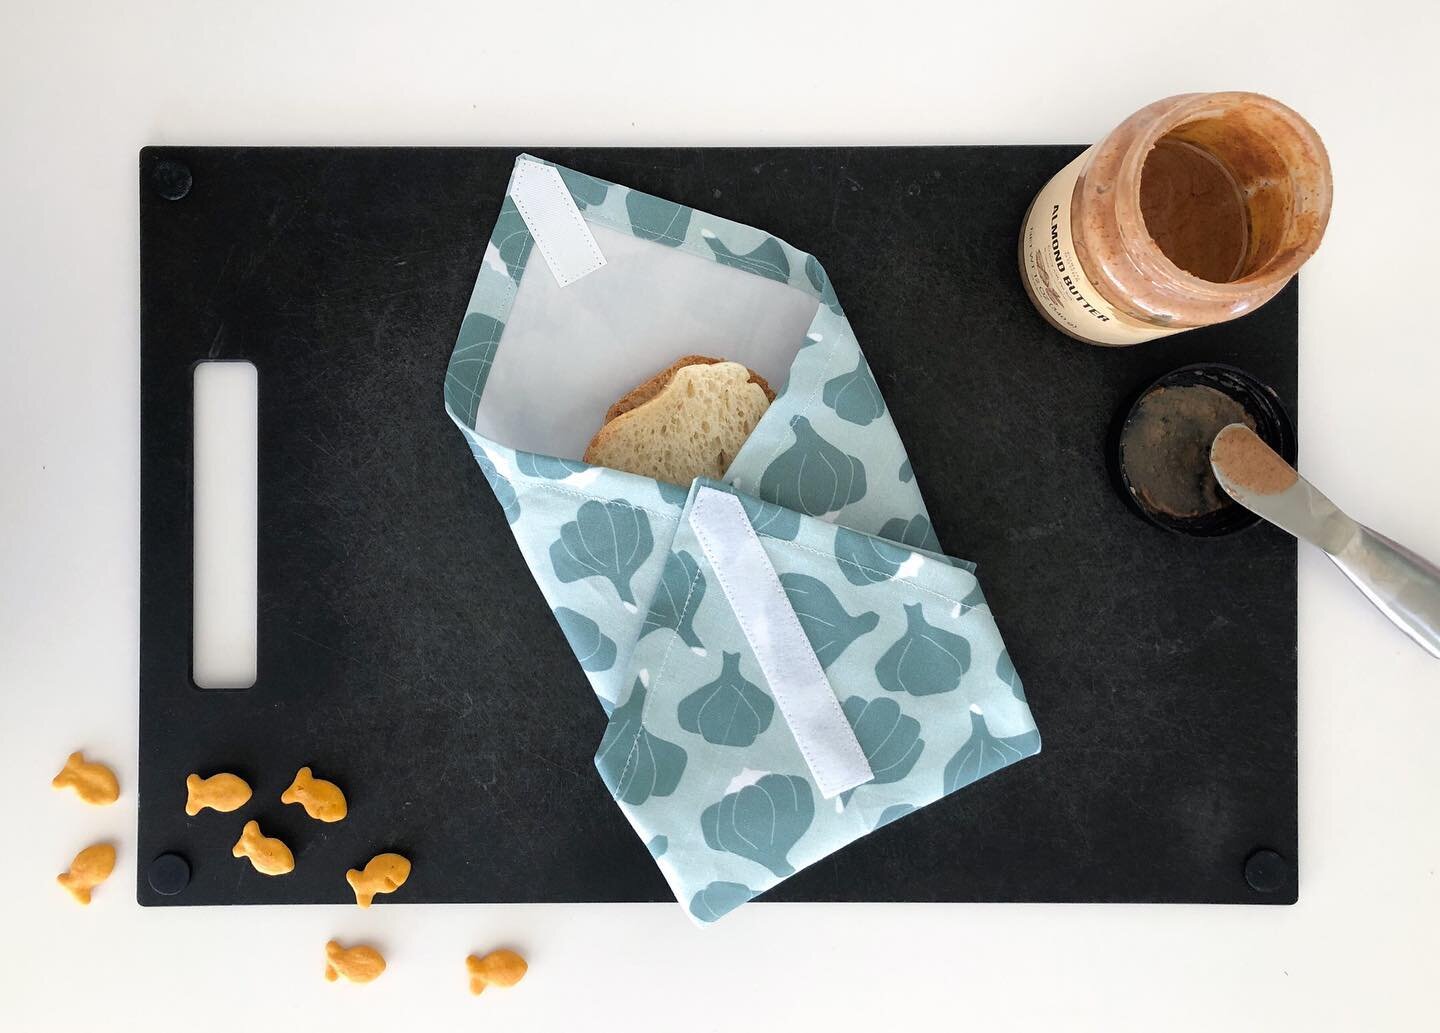 I&rsquo;ve been waiting so long to share this fun project with you all! Go check out the @SuzyQuilts blog to learn how to make these chic and functional reusable sandwich wraps! They are a cinch and the perfect summer picnic project. 

Also, how cute